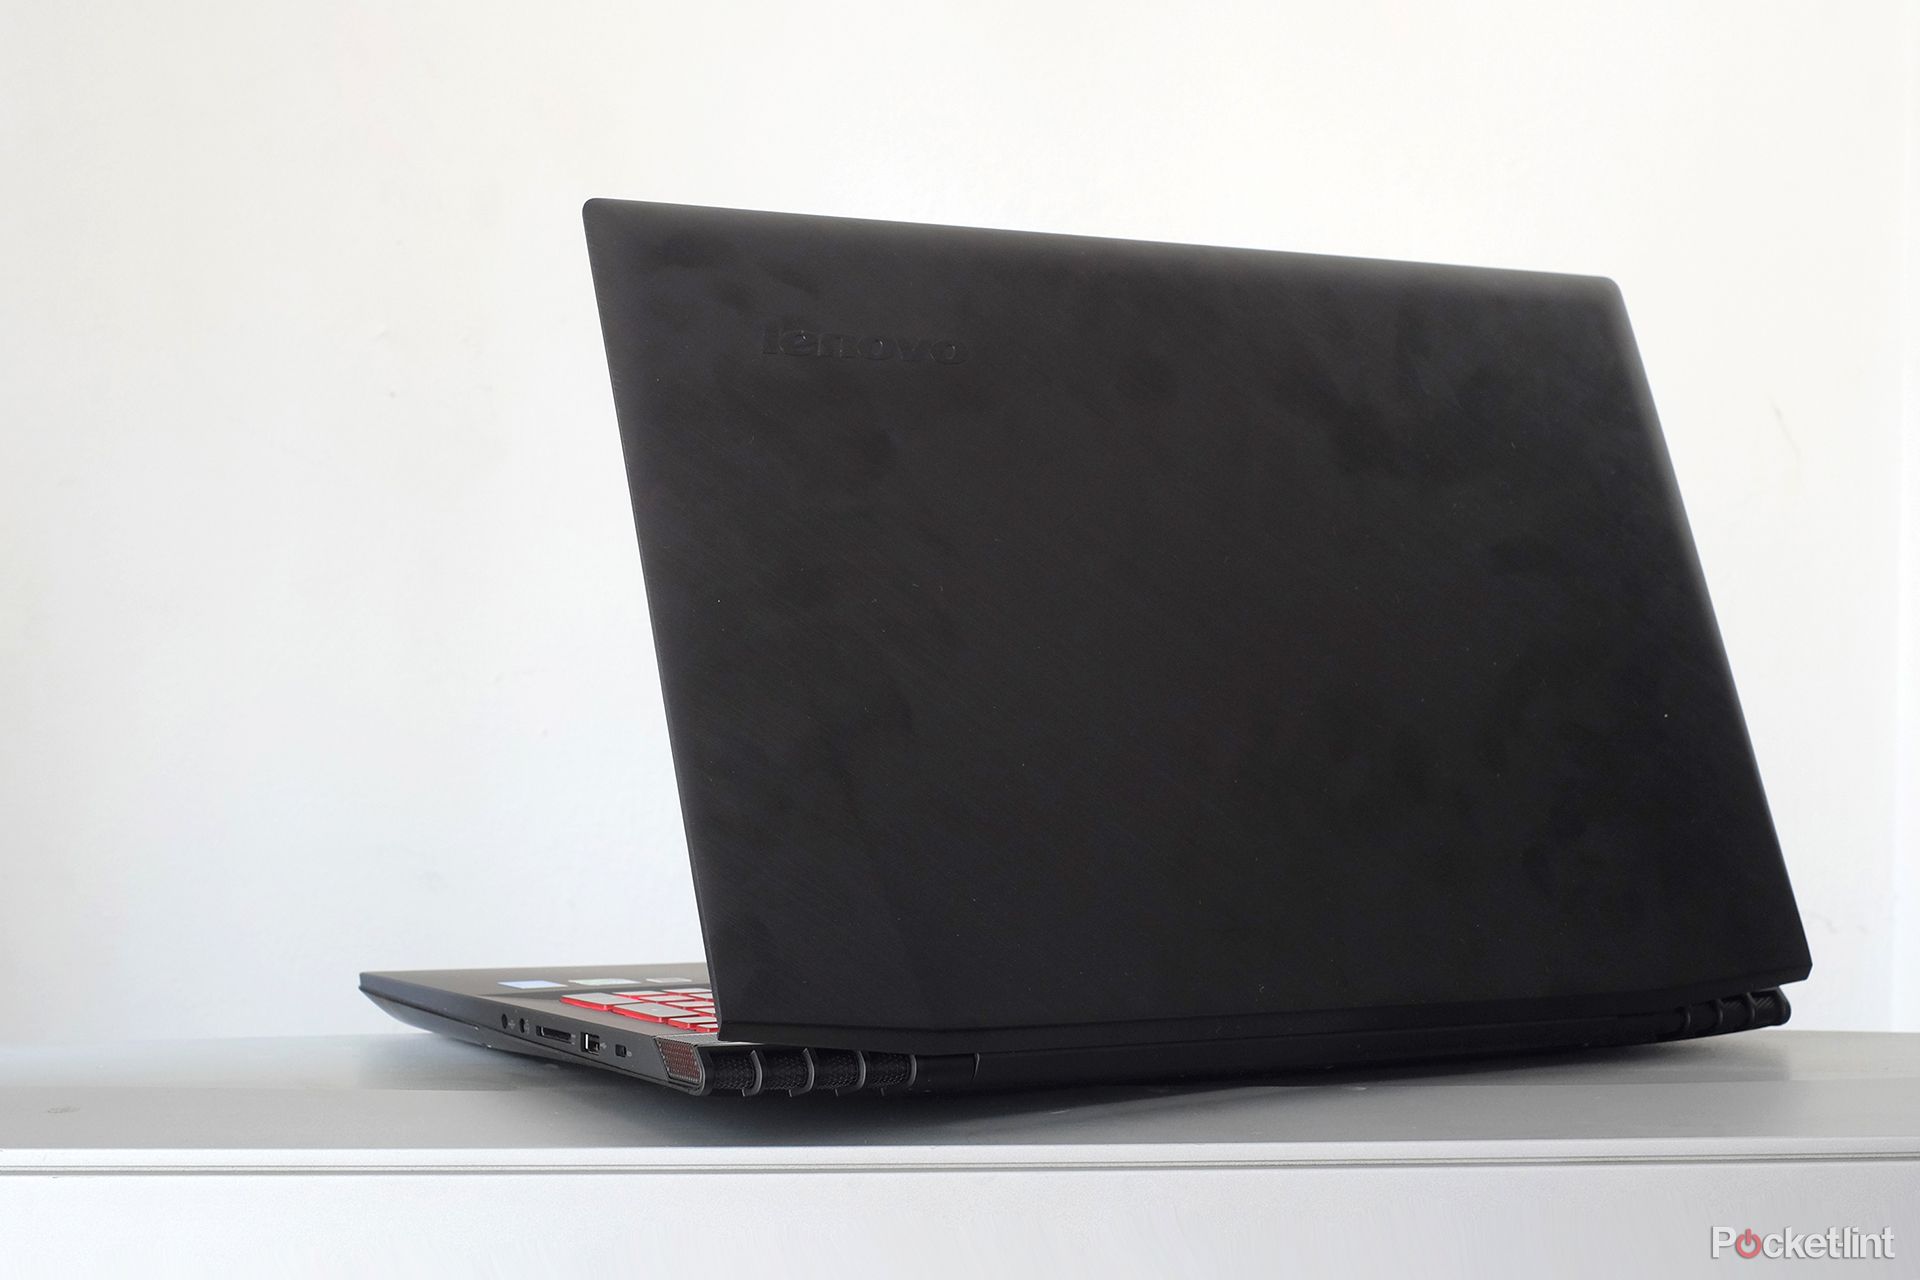 lenovo y50 review image 3